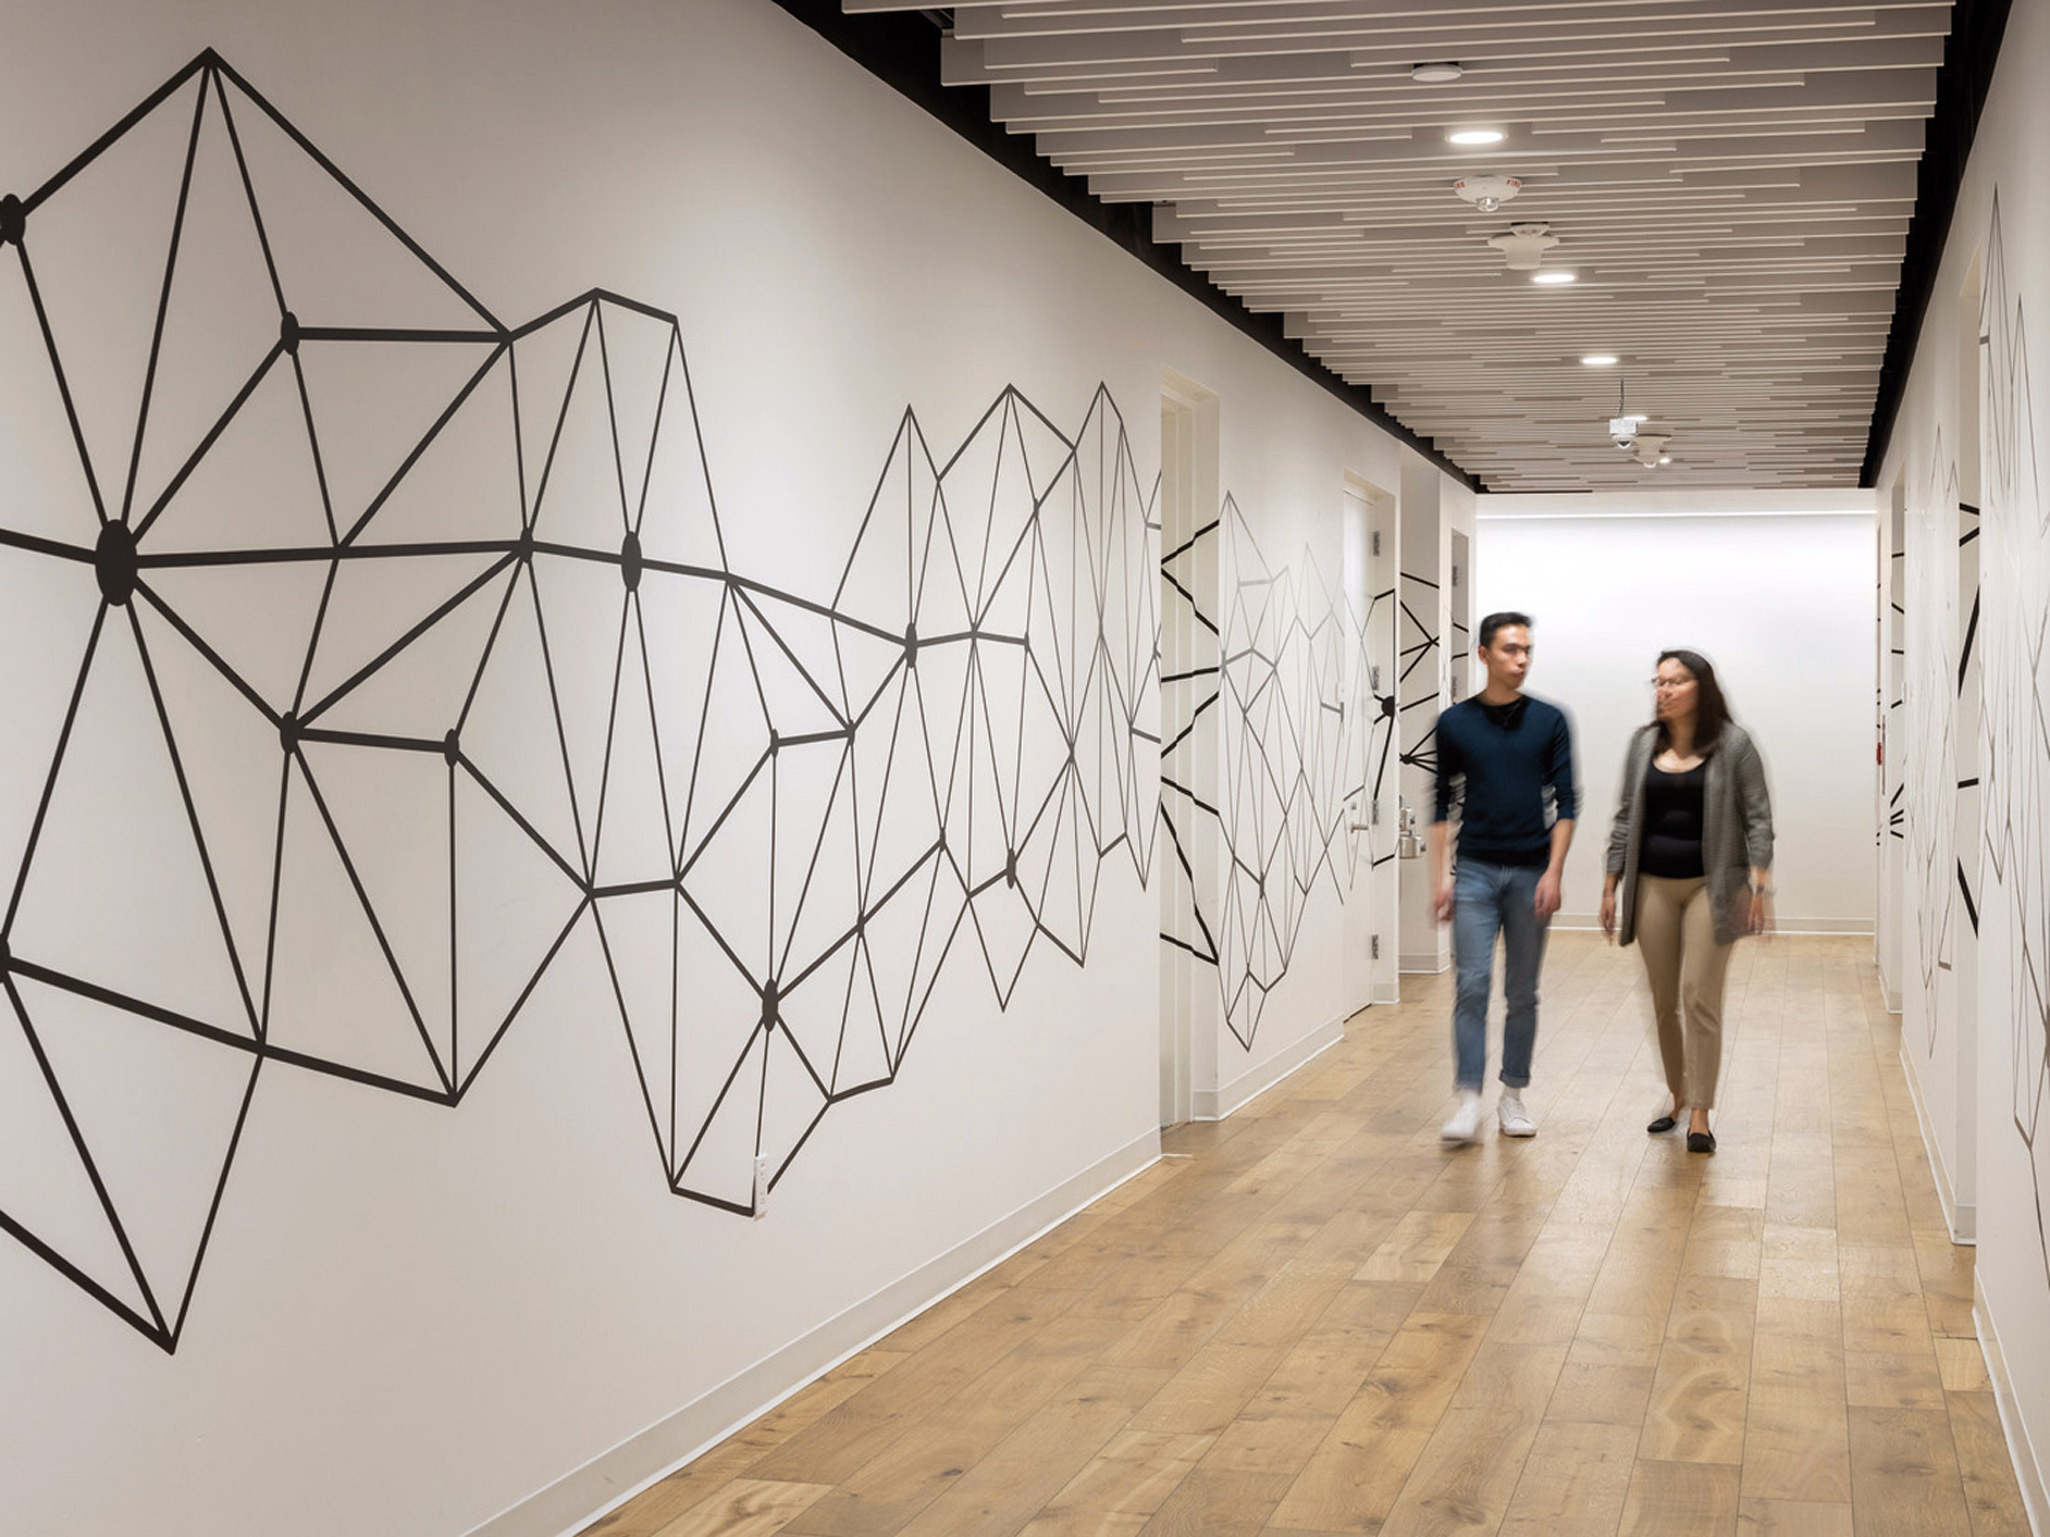 An expansive modern hallway with a geometric mural on the left wall, featuring abstract black line art on a white background. Linear lighting fixtures parallel the mural above, complementing the natural wooden flooring and minimalistic design as two individuals walk through.